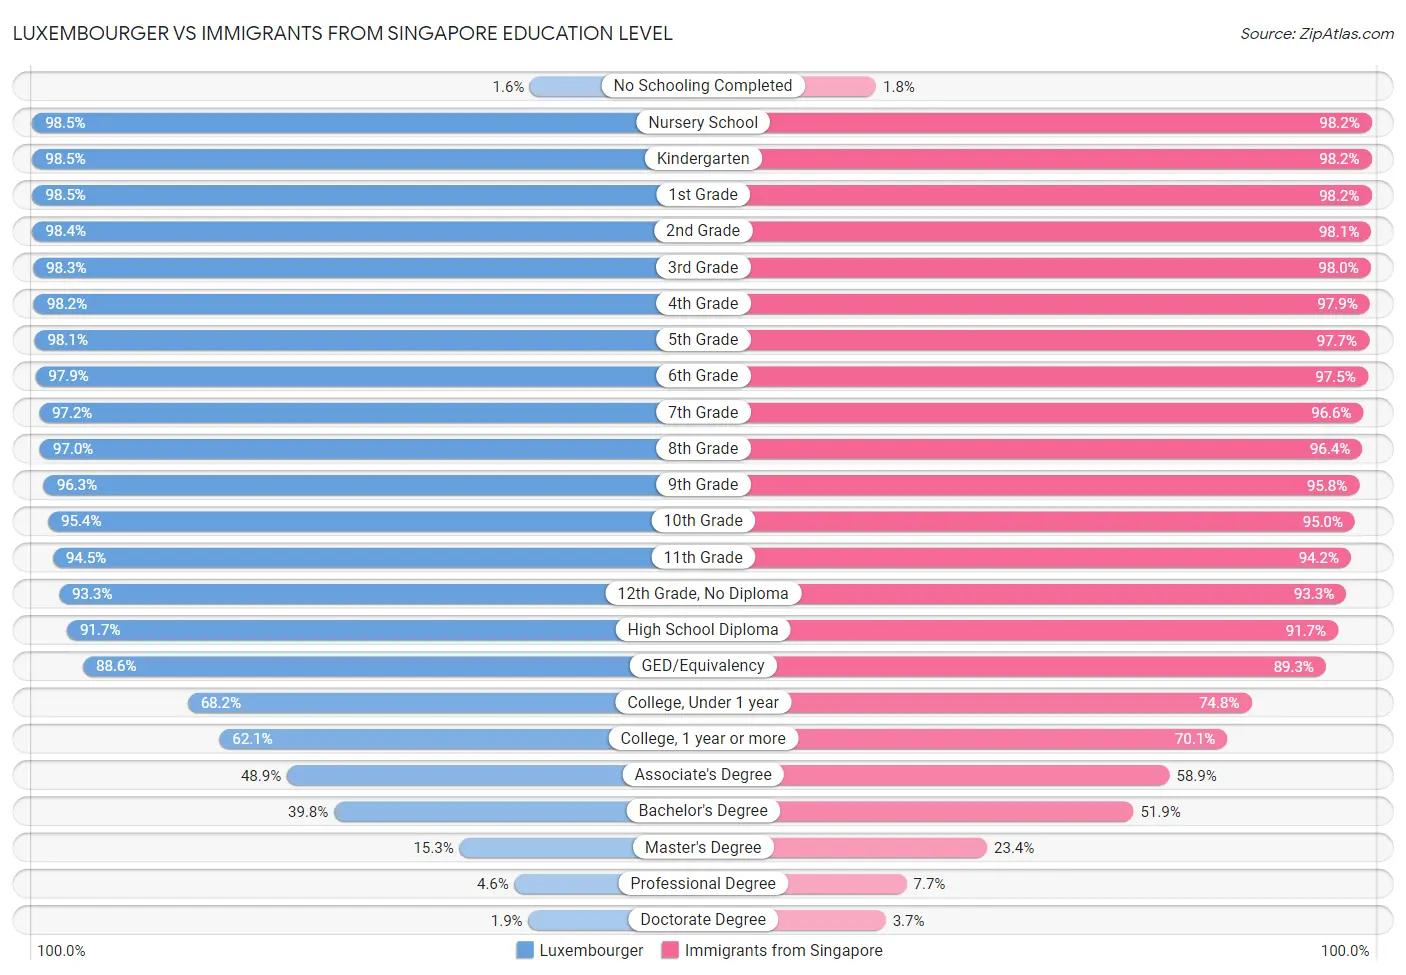 Luxembourger vs Immigrants from Singapore Education Level